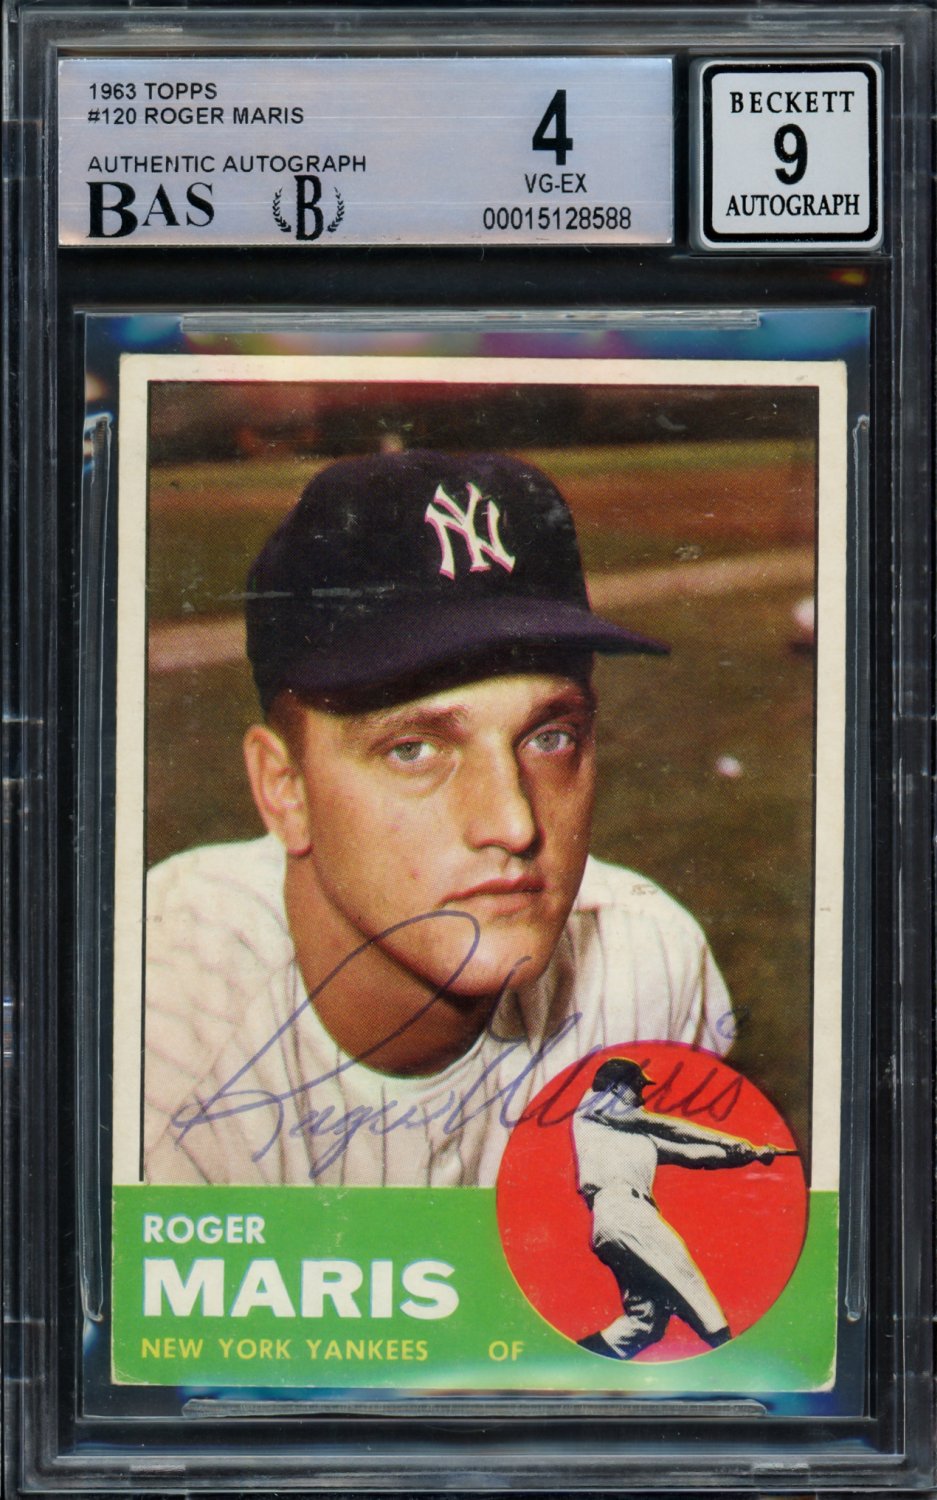 Roger Maris Autographed 1963 Topps Card #120 New York Yankees BGS